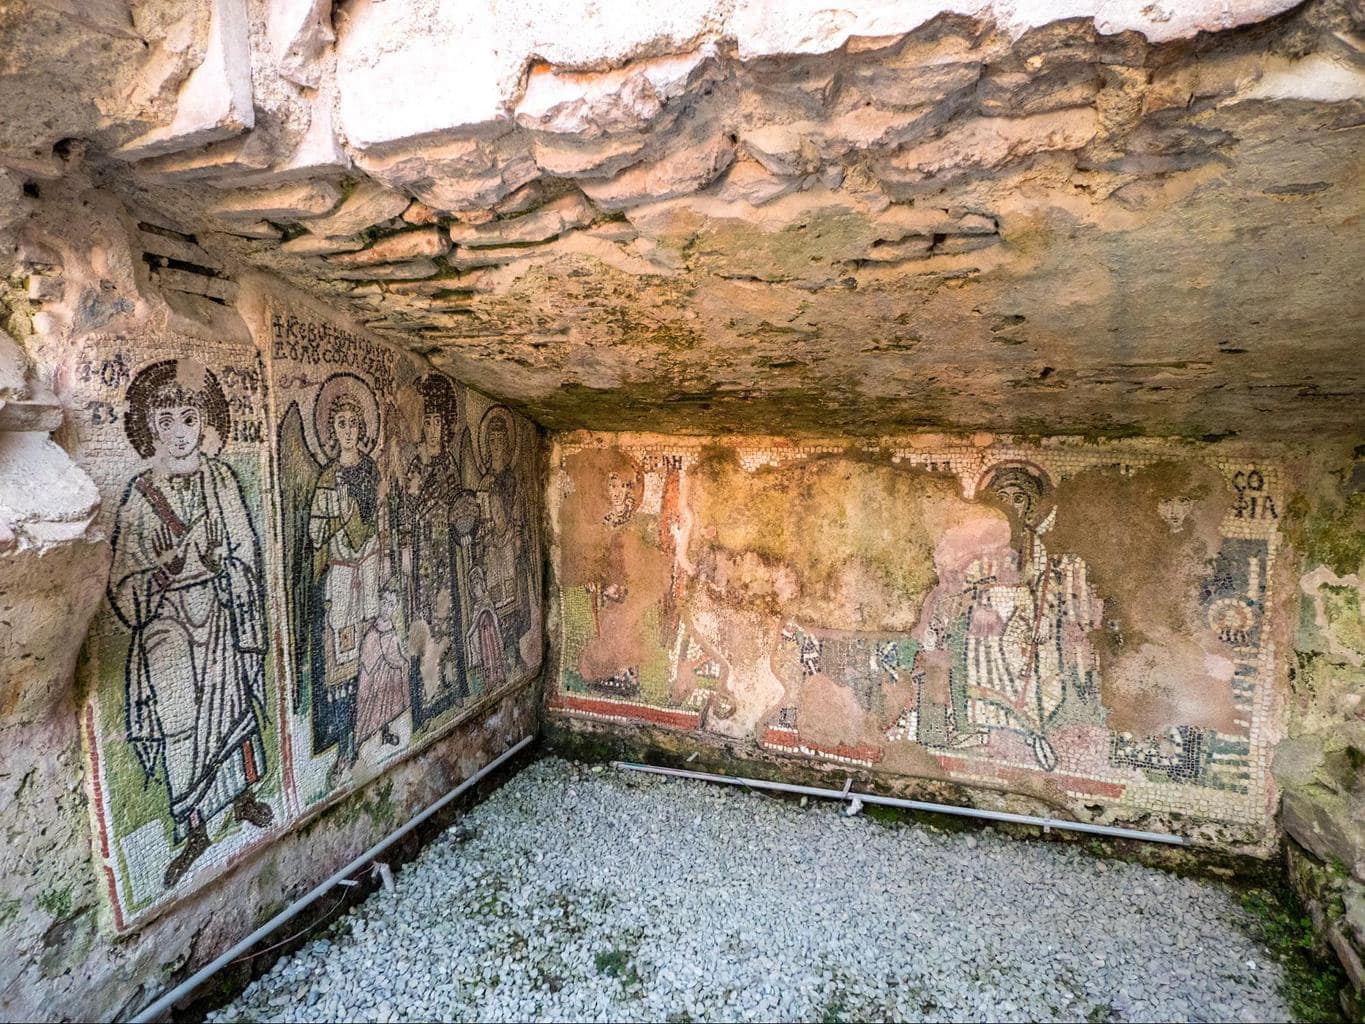 Frescoes inside the Byzantine church of the Roman Amphitheatre of Durres